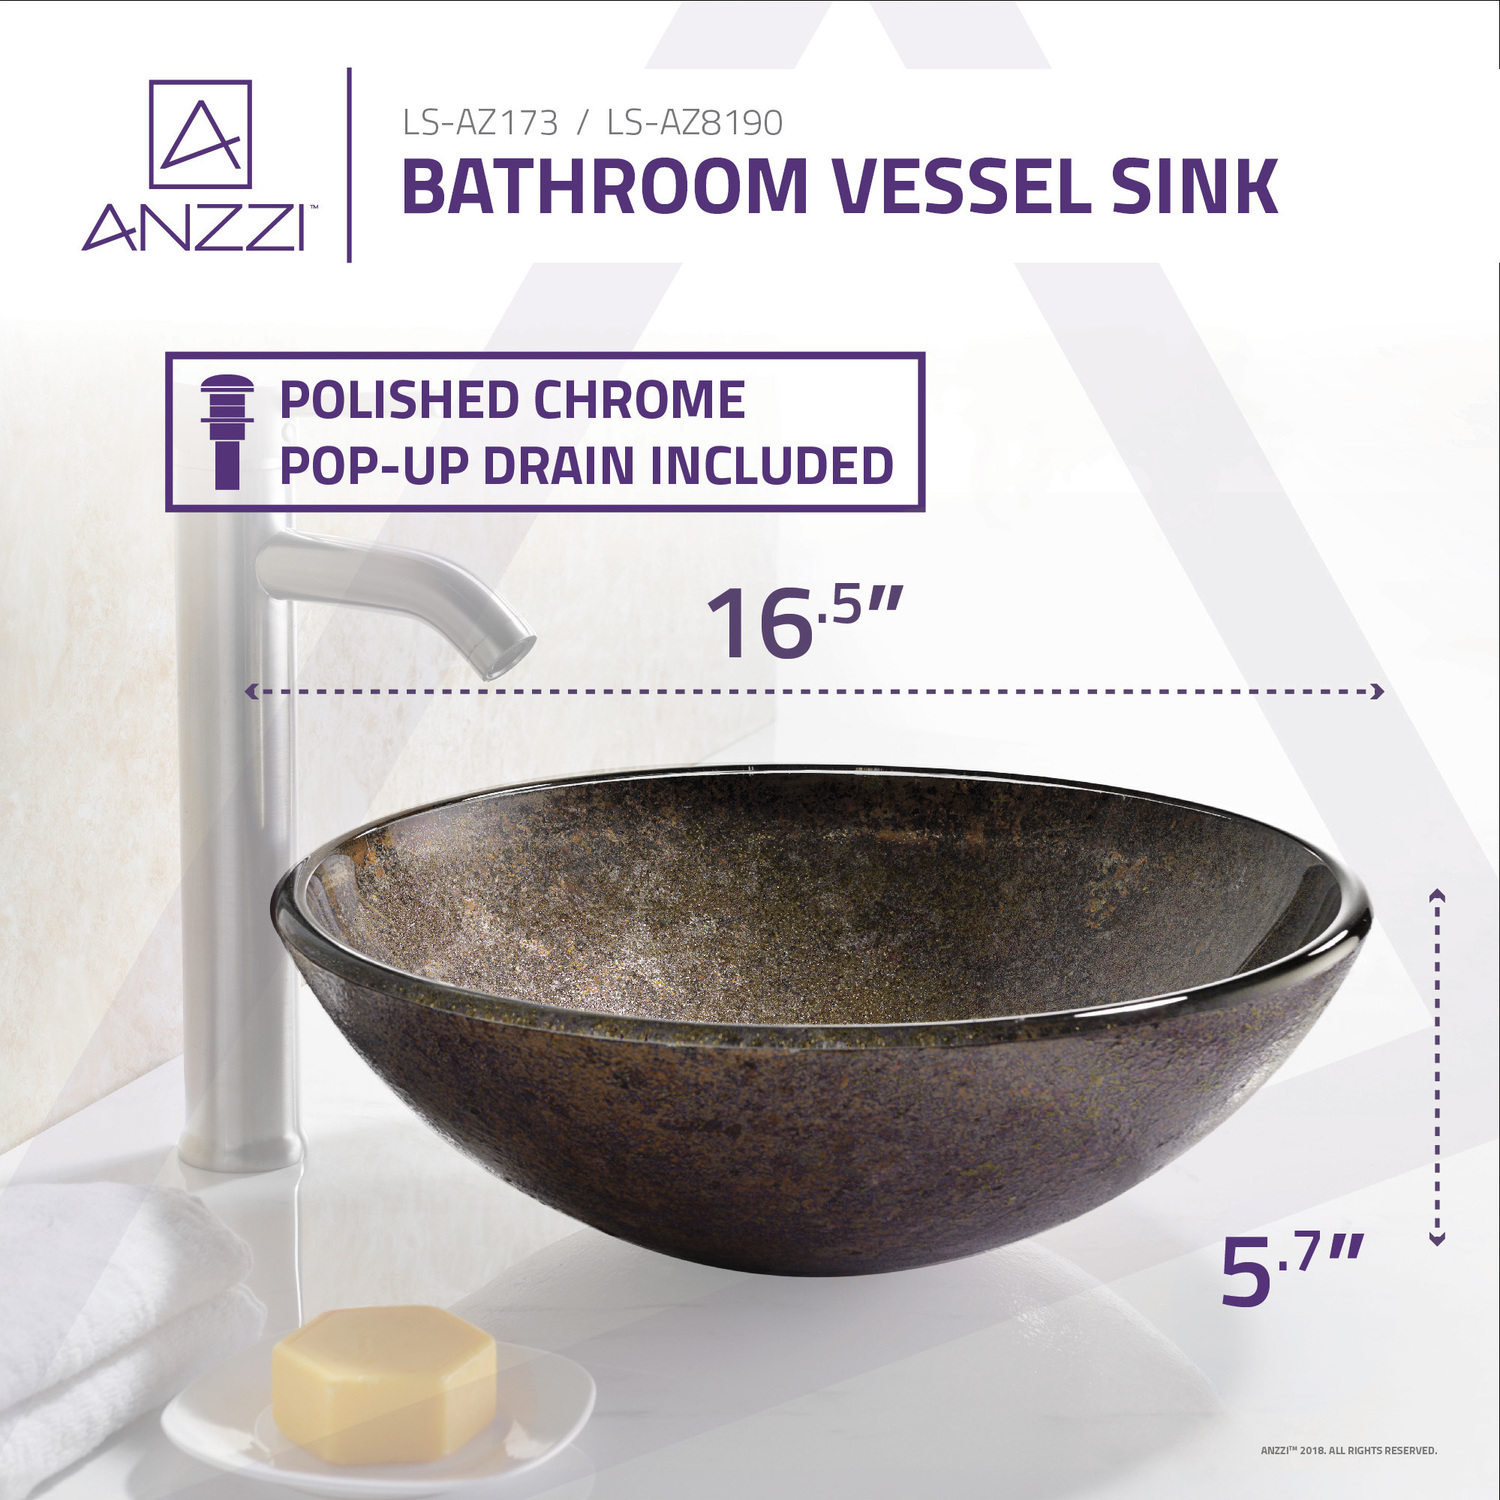 vessel sink faucet Anzzi BATHROOM - Sinks - Vessel - Tempered Glass Multi-Colored